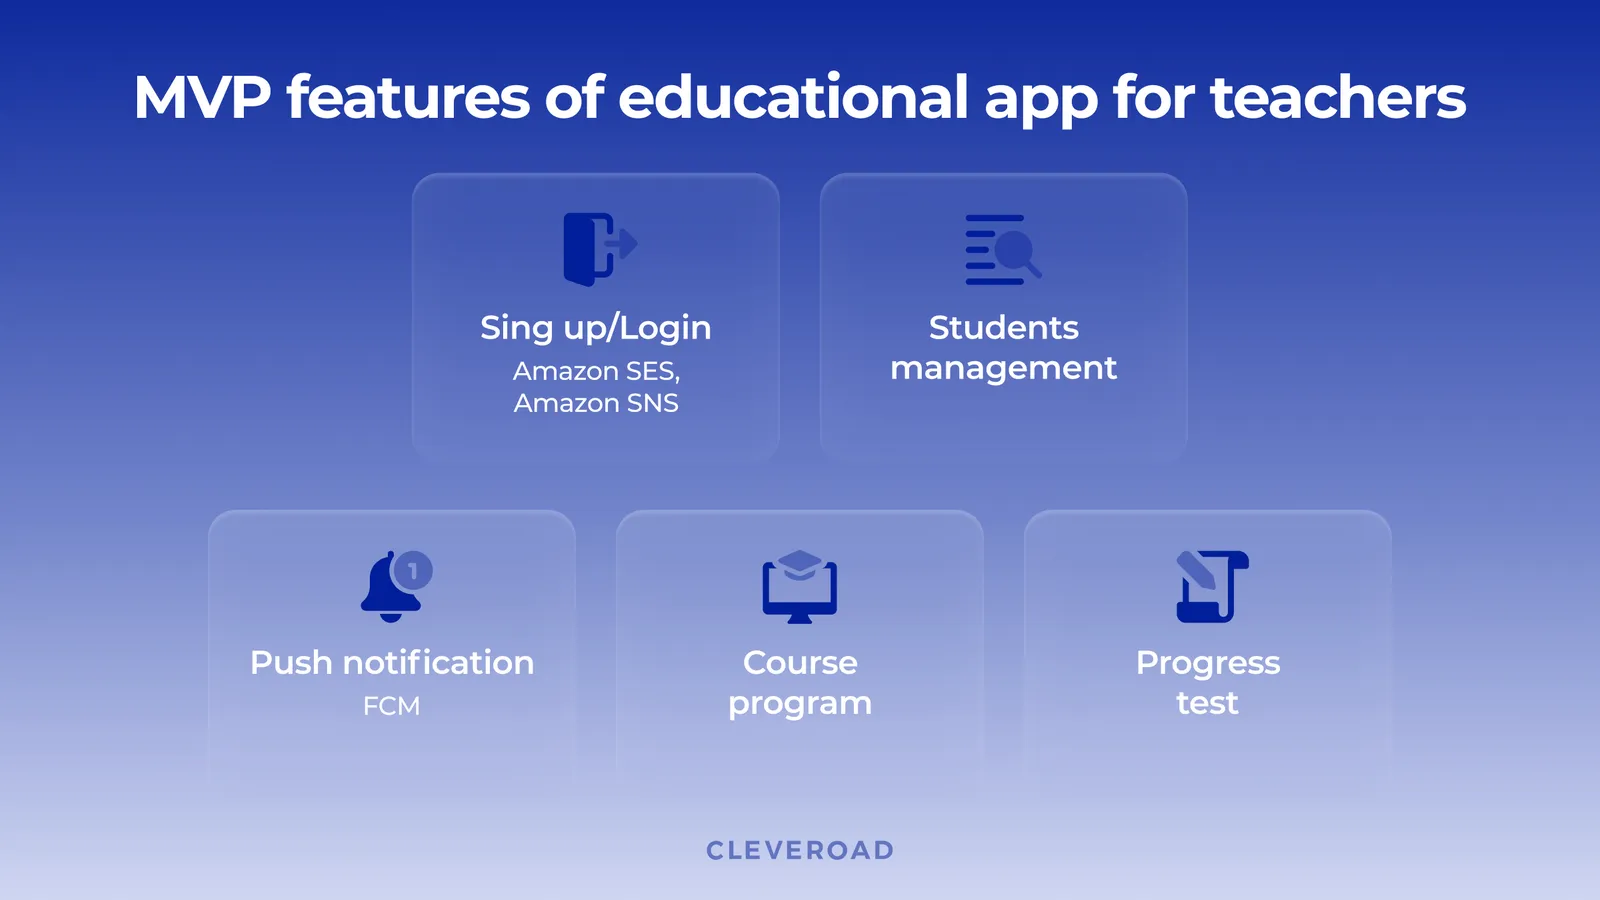 Features of an education app